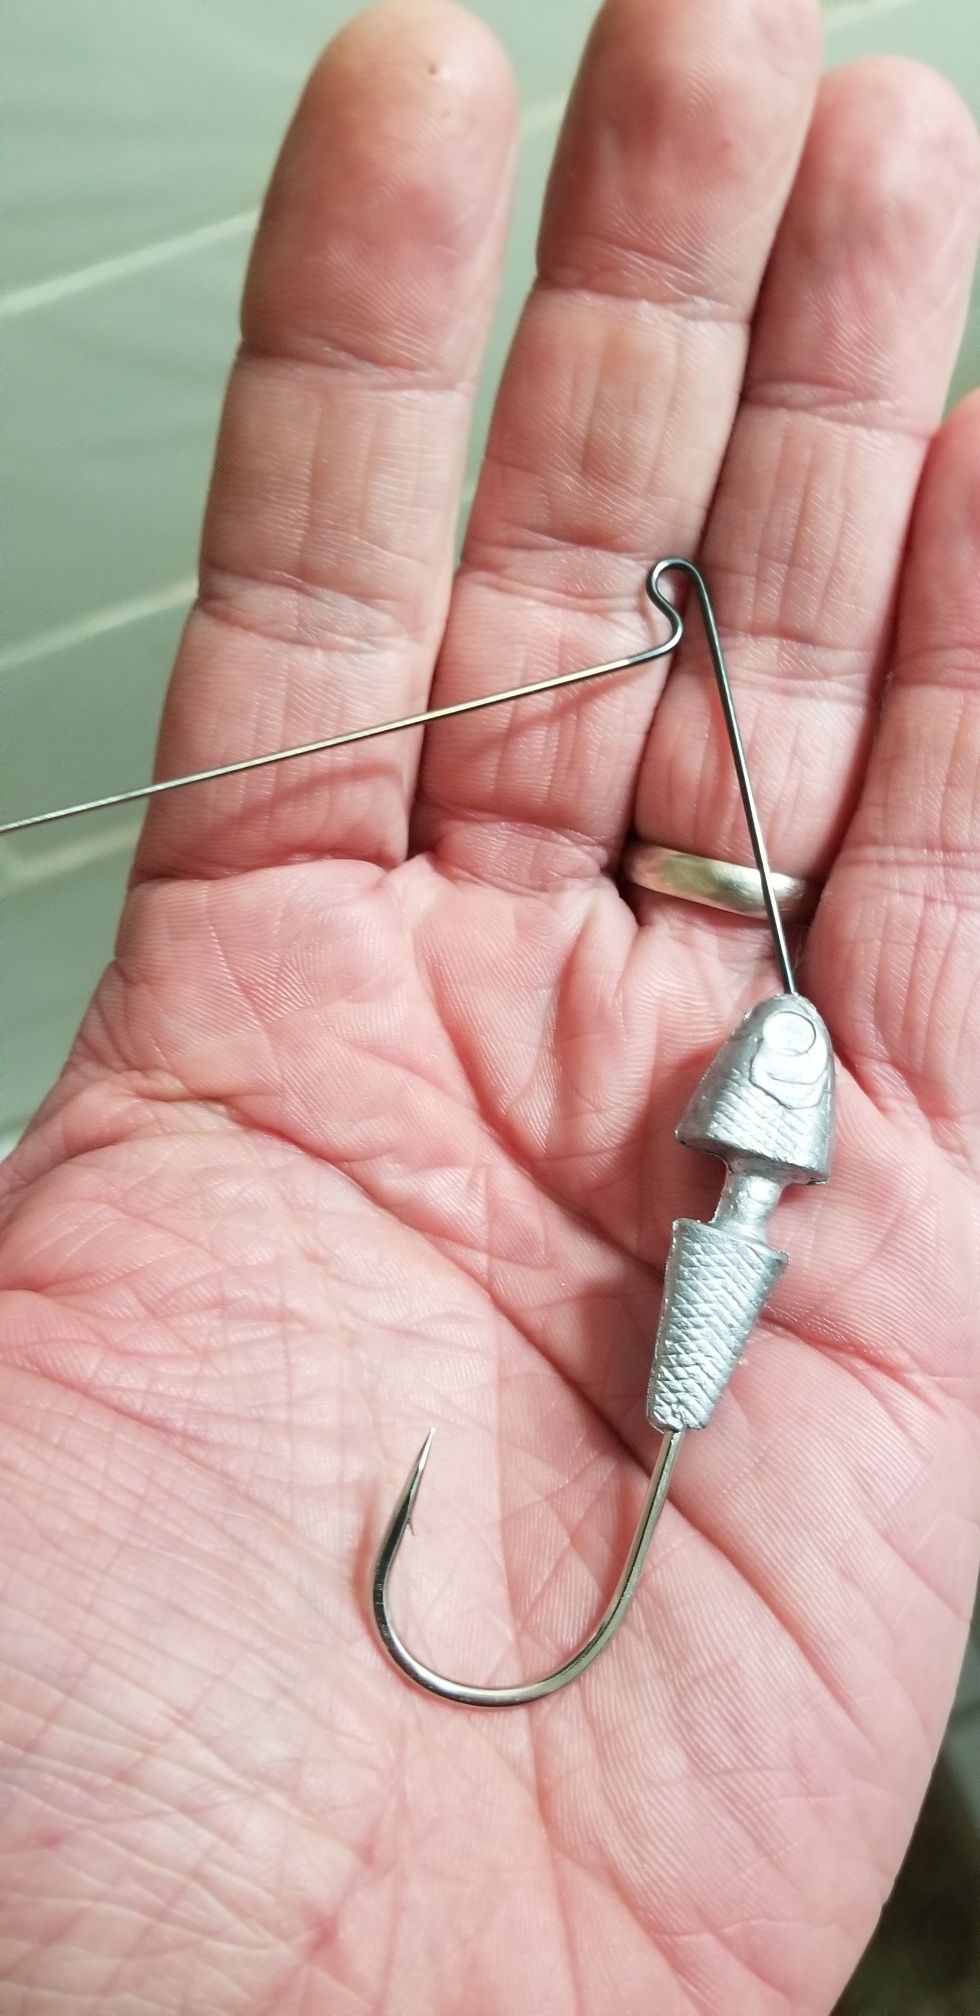 Titanium spinnerbait head - Tacklemaking - Bass Fishing Forums